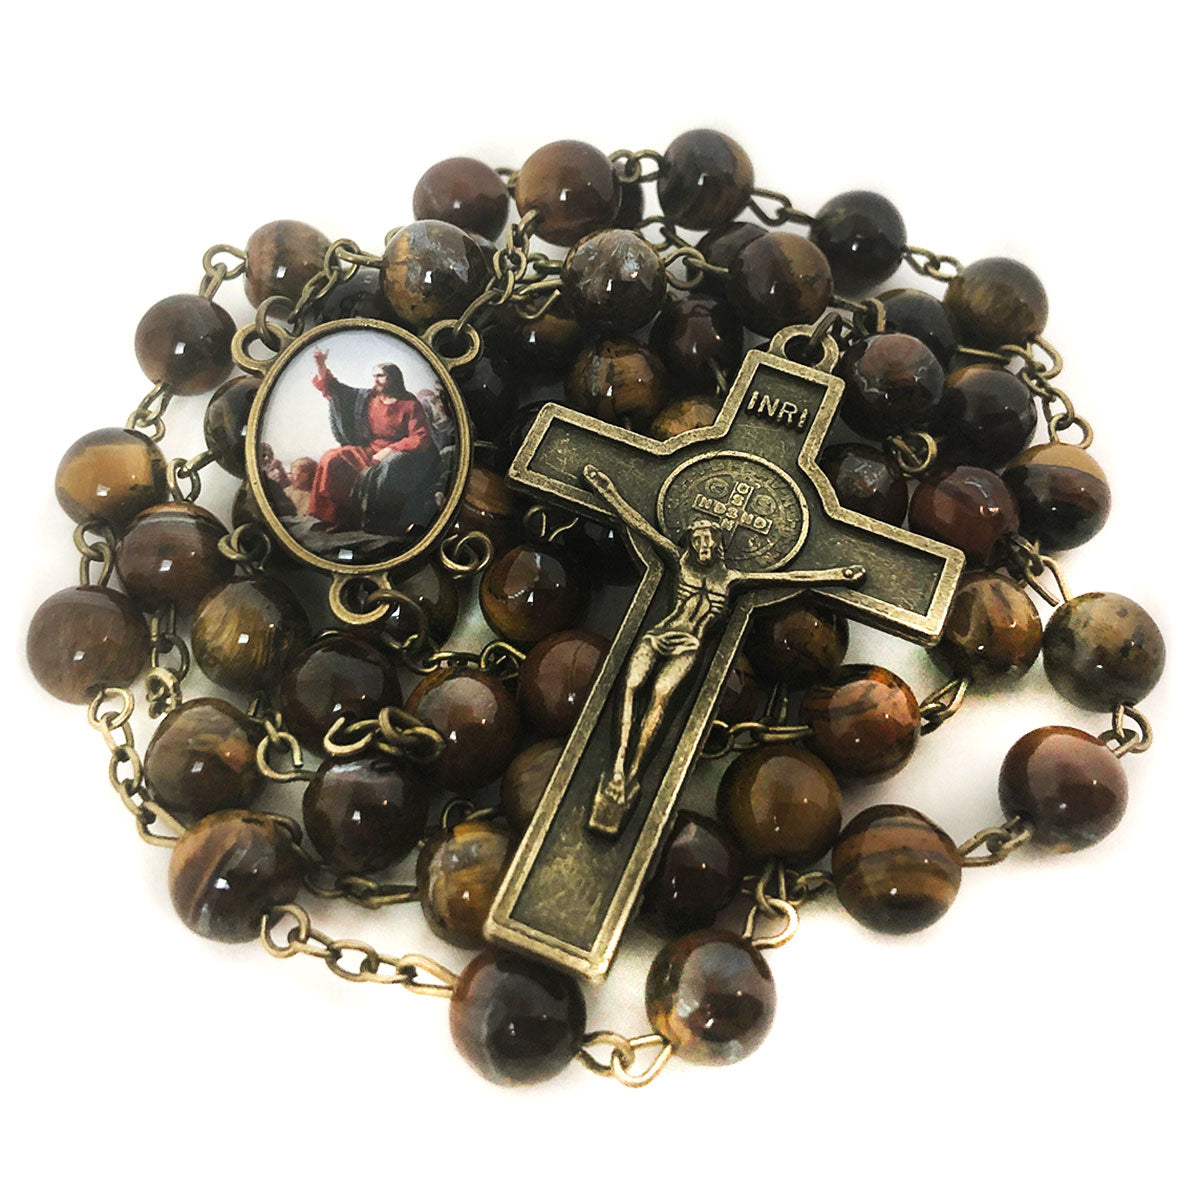 Tiger's Eye Stone Jesus Sermon On the Mount Rosary and Rosary Bracelet Set by Catholic Heirlooms